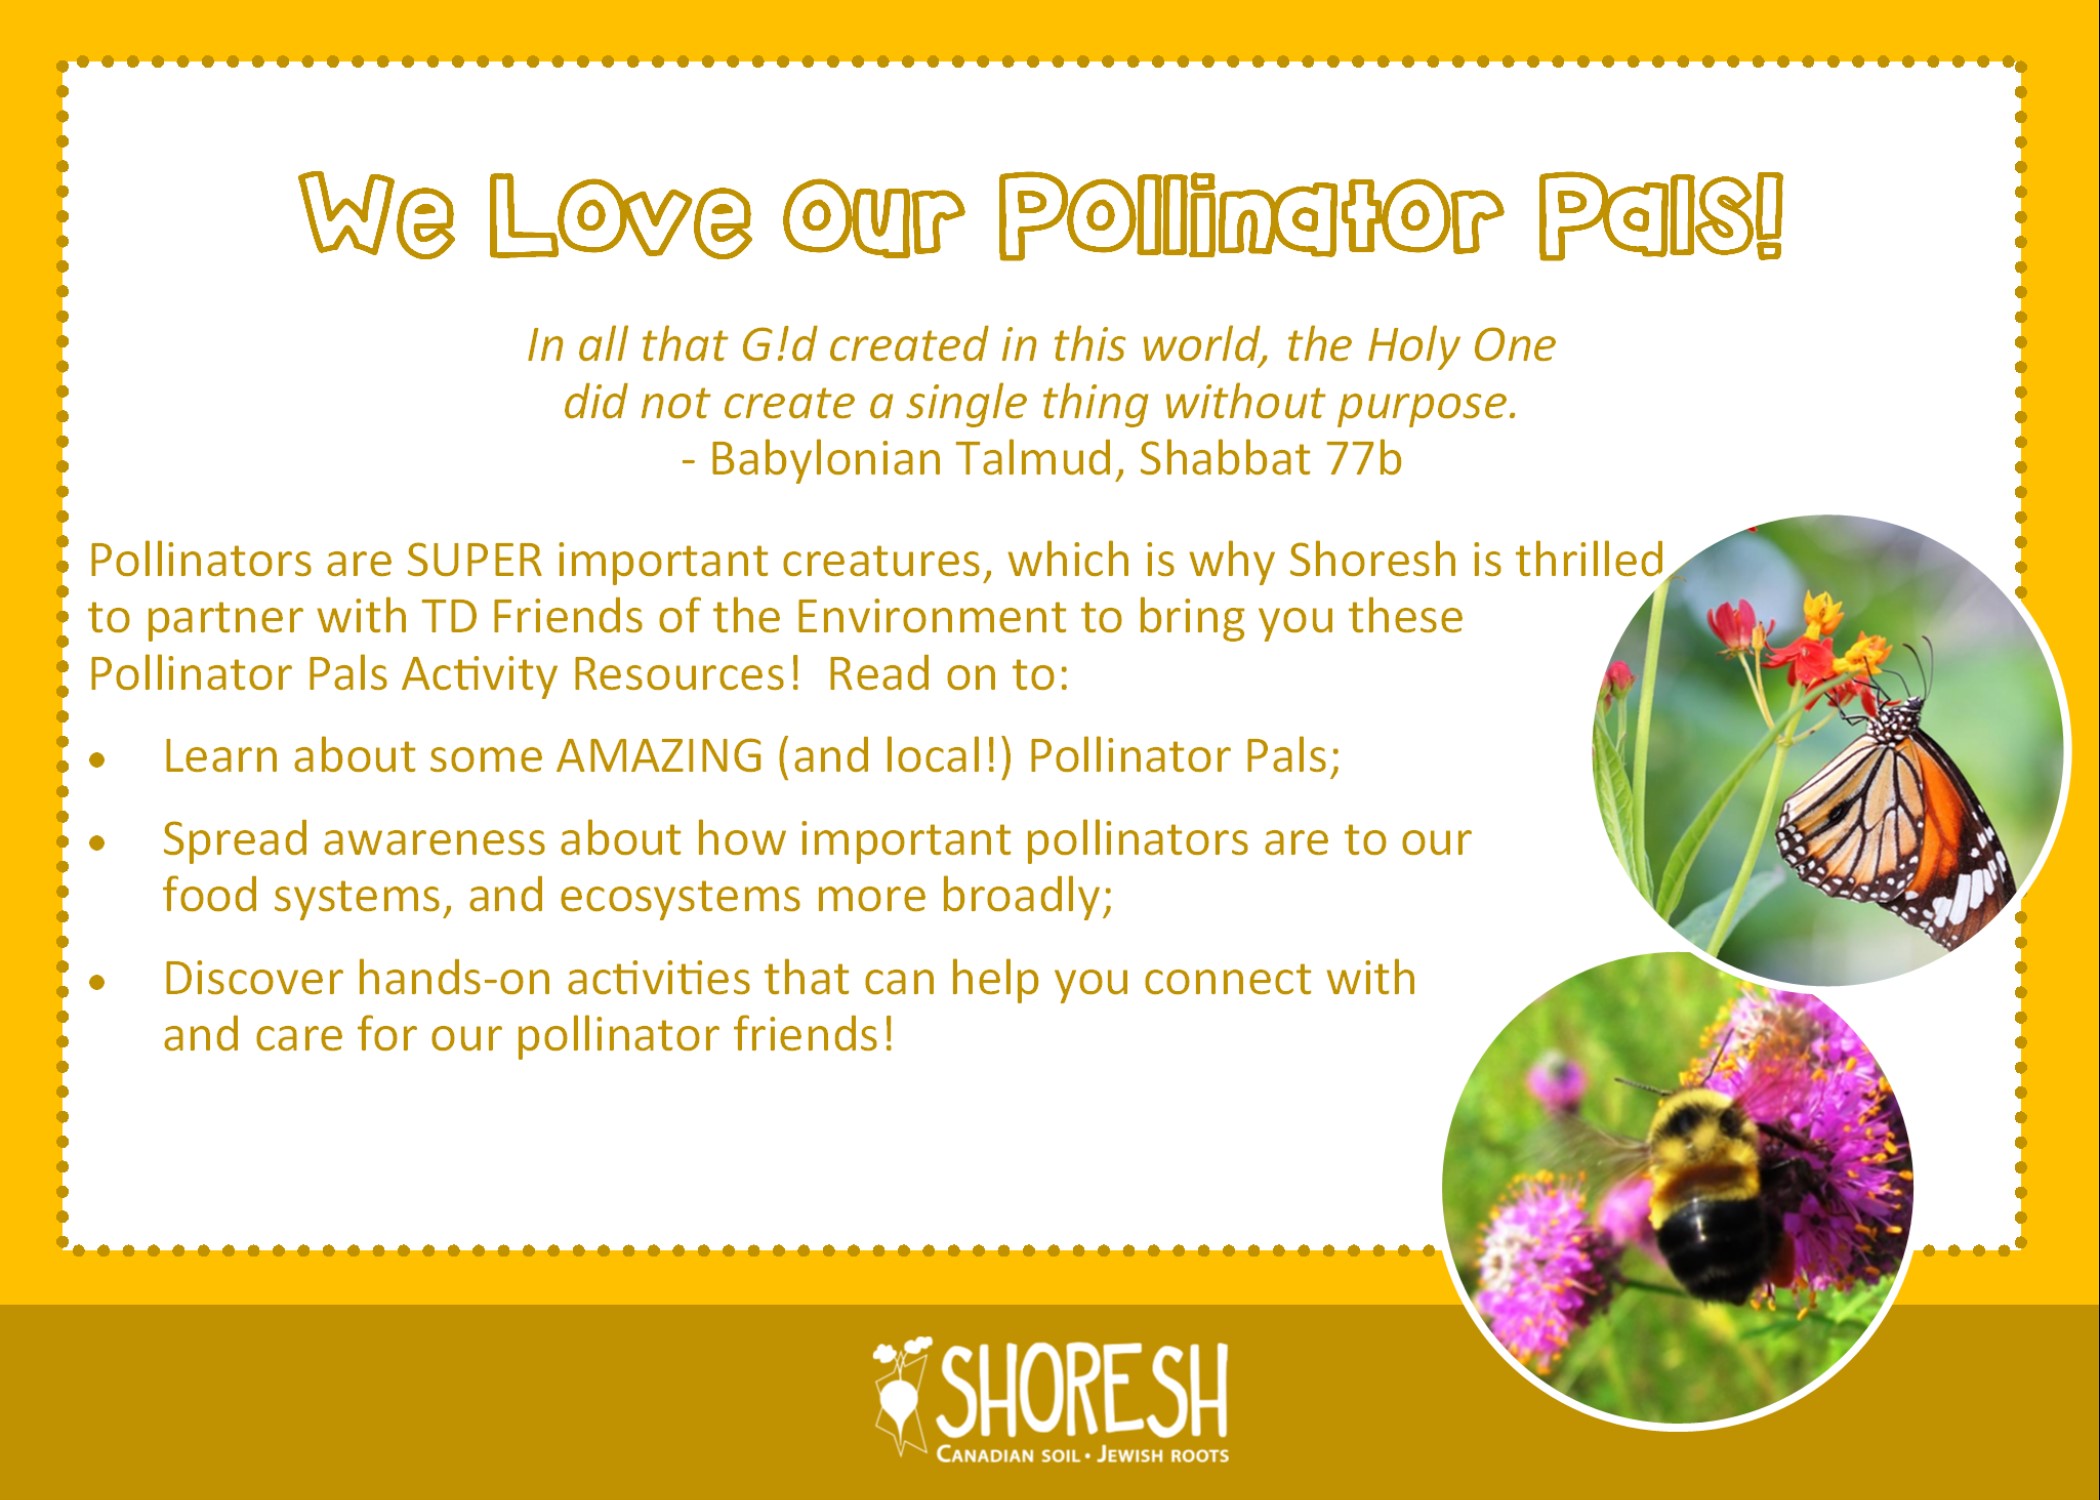 We Love our Pollinator Pals! In all that G!d created in this world, the Holy One did not create a single thing without purpose. - Babylonian Talmud, Shabbat 77b Pollinators are SUPER important creatures, which is why Shoresh is thrilled to partner with TD Friends of the Environment to bring you these Pollinator Pals Activity Resources! Read on to: Learn about some AMAZING (and local!) Pollinator Pals; Spread awareness about how important pollinators are to our food systems, and ecosystems more broadly; Discover hands-on activities that can help you connect with and care for our pollinator friends!